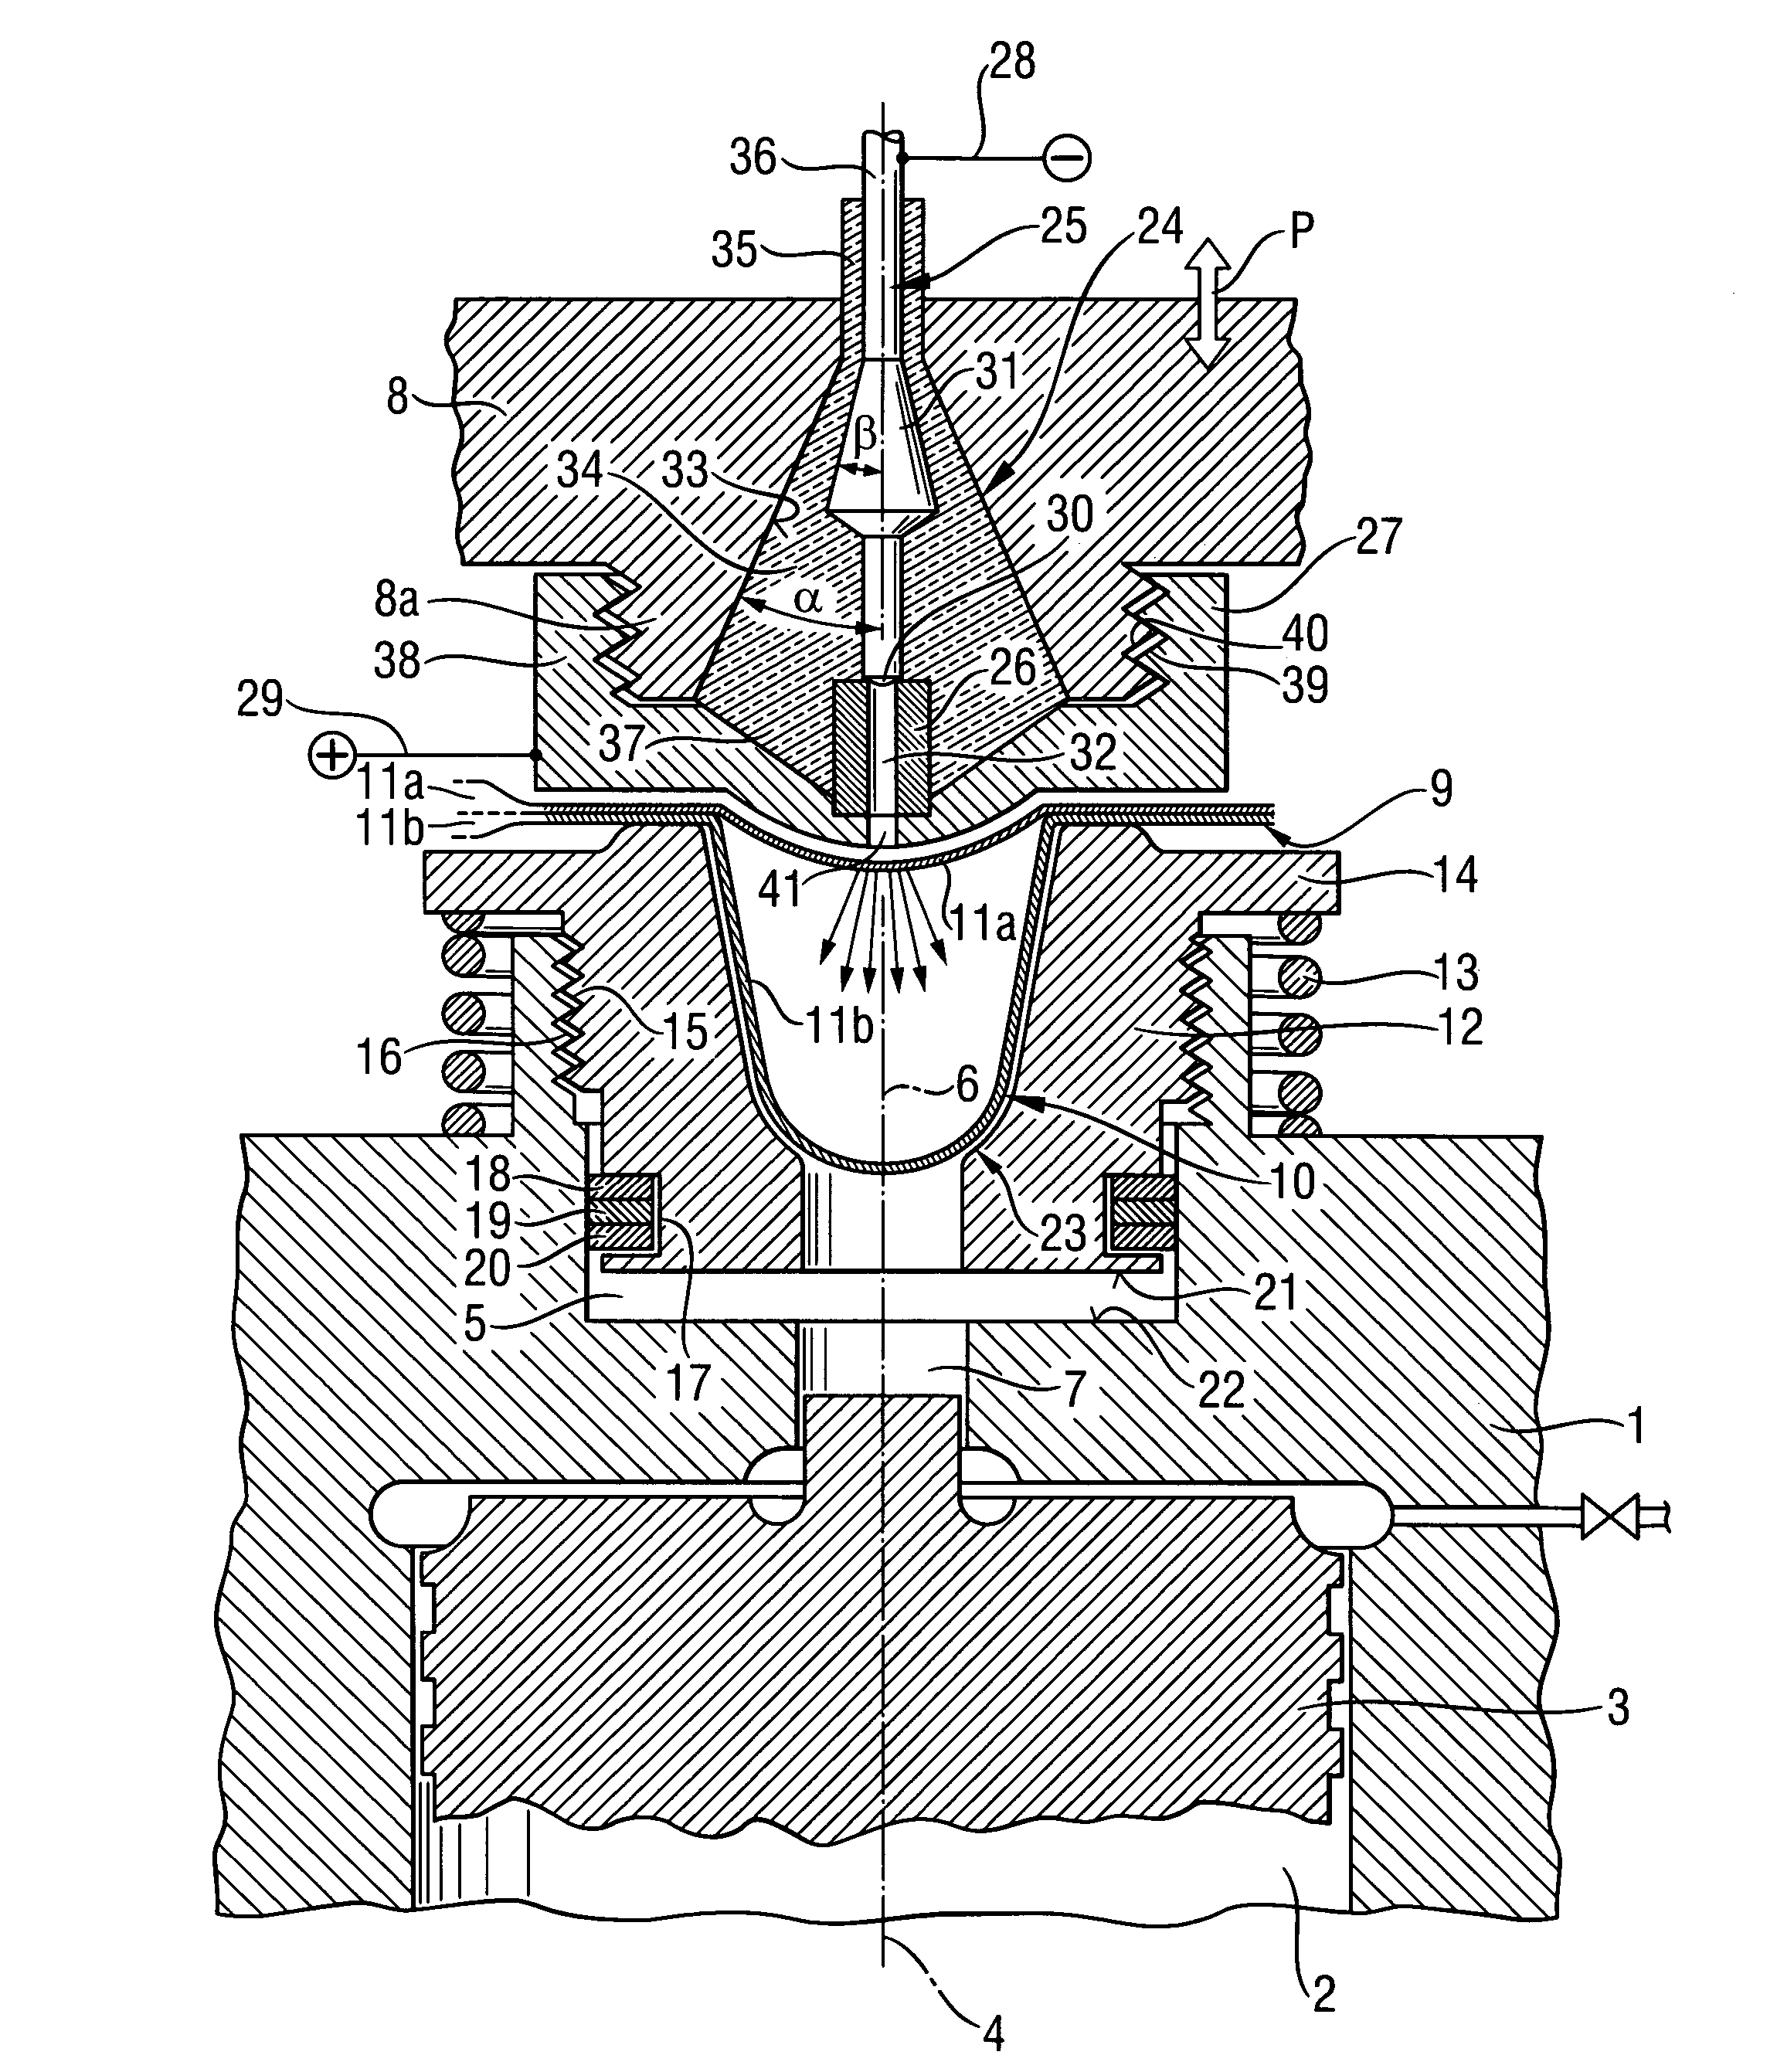 Ignition device for igniting a foil cartridge in an explosion-operated power tool